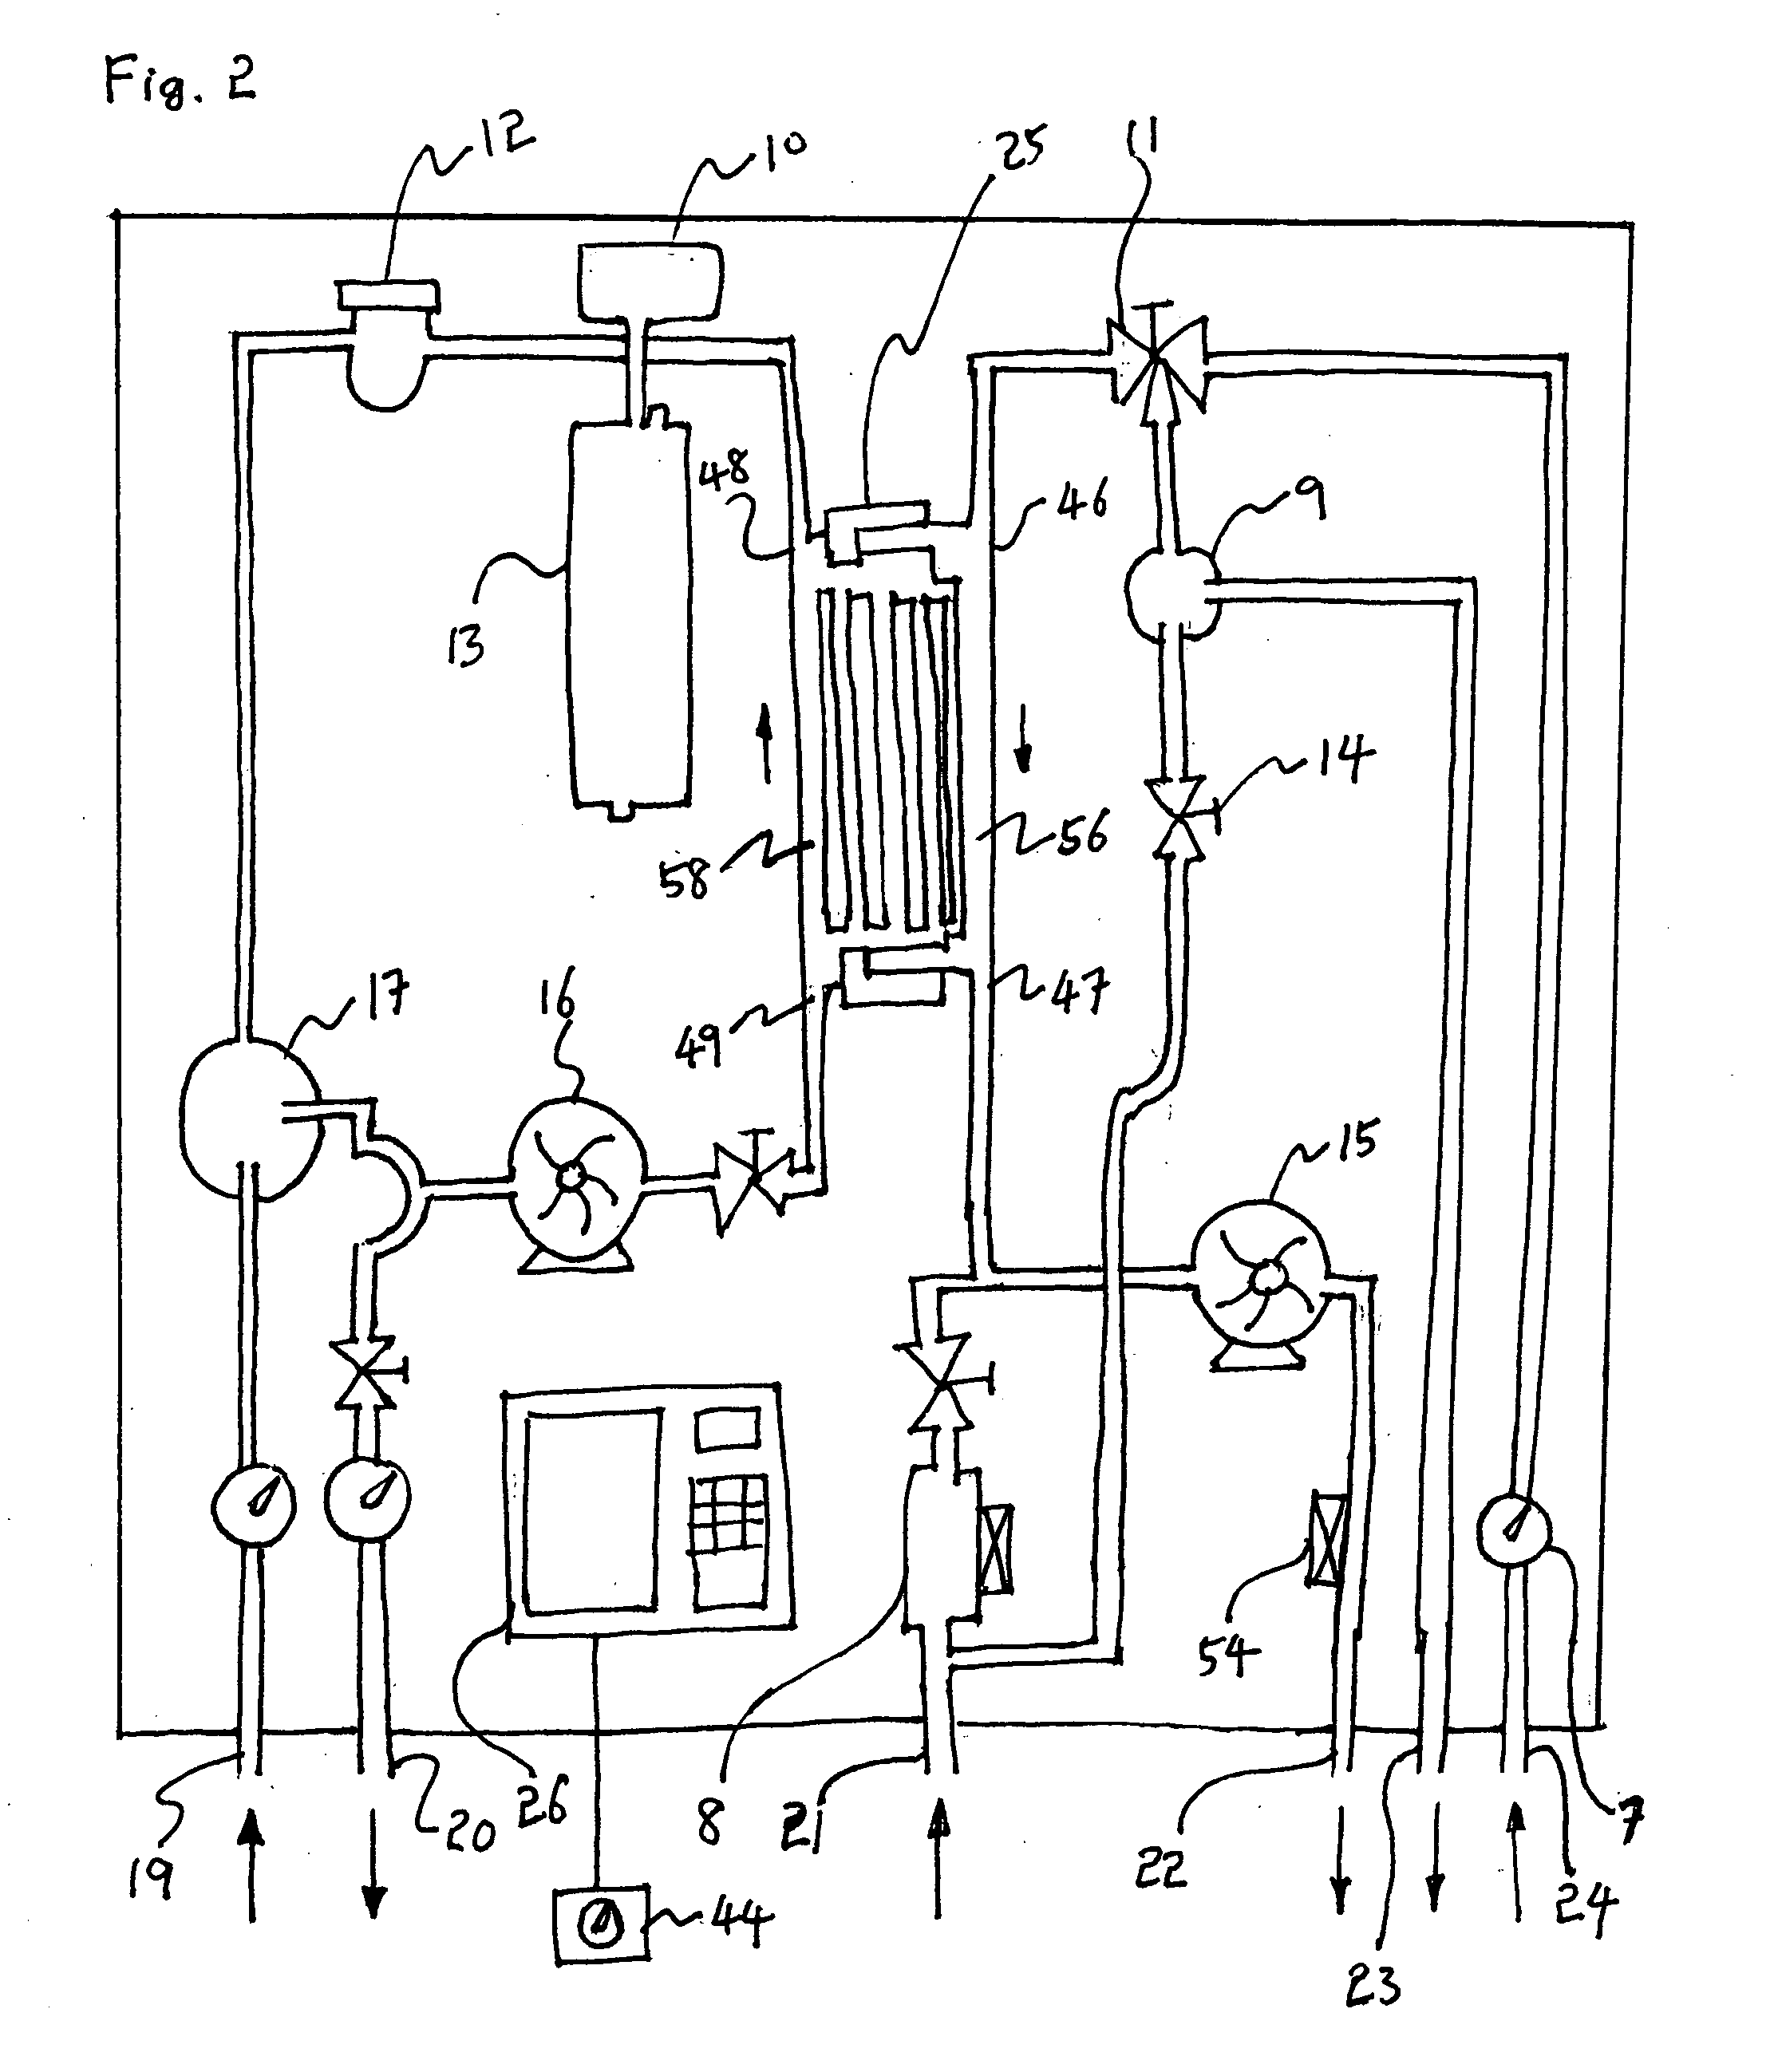 Heated fluid distribution apparatus for combined domestic hot water supply and space heating system in closed loop